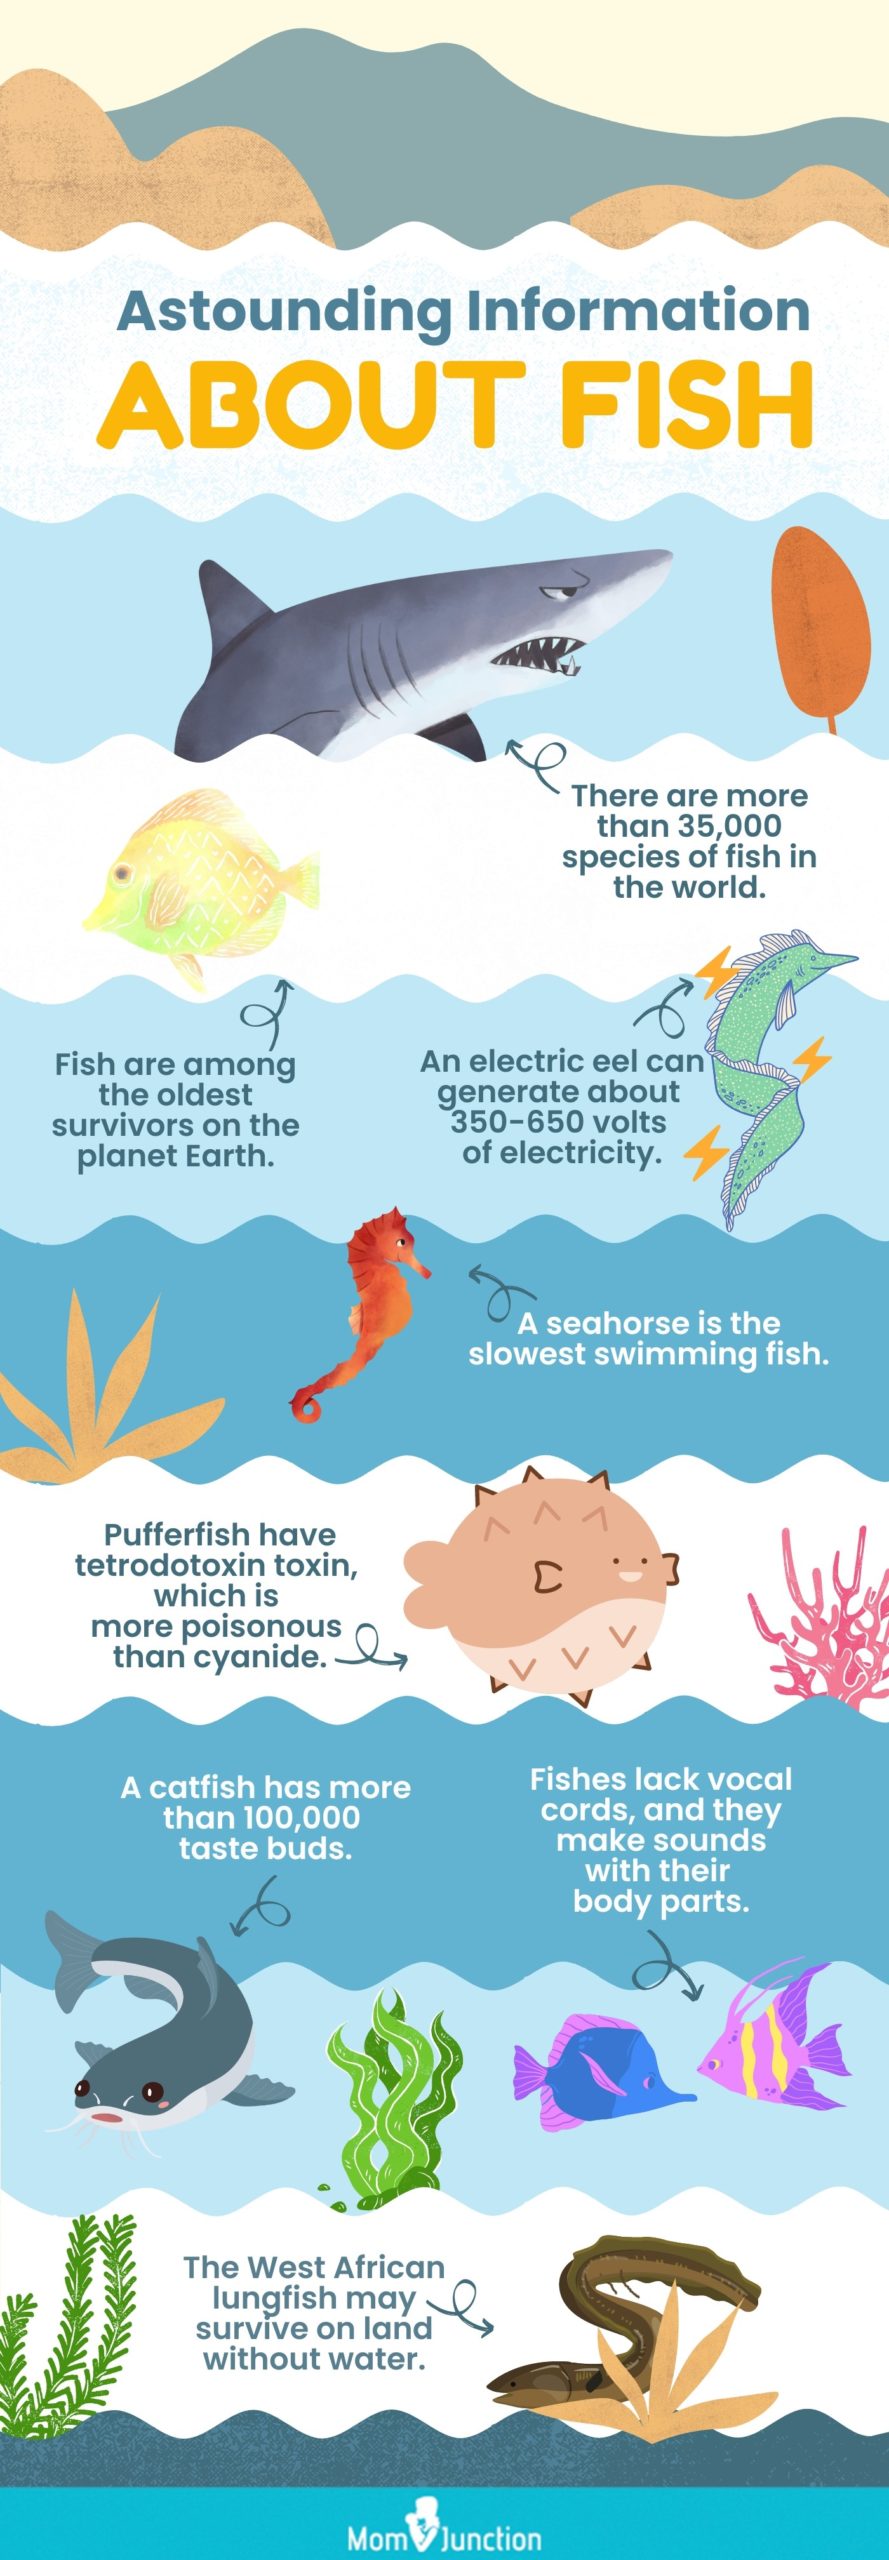 astounding information about fish [infographic]